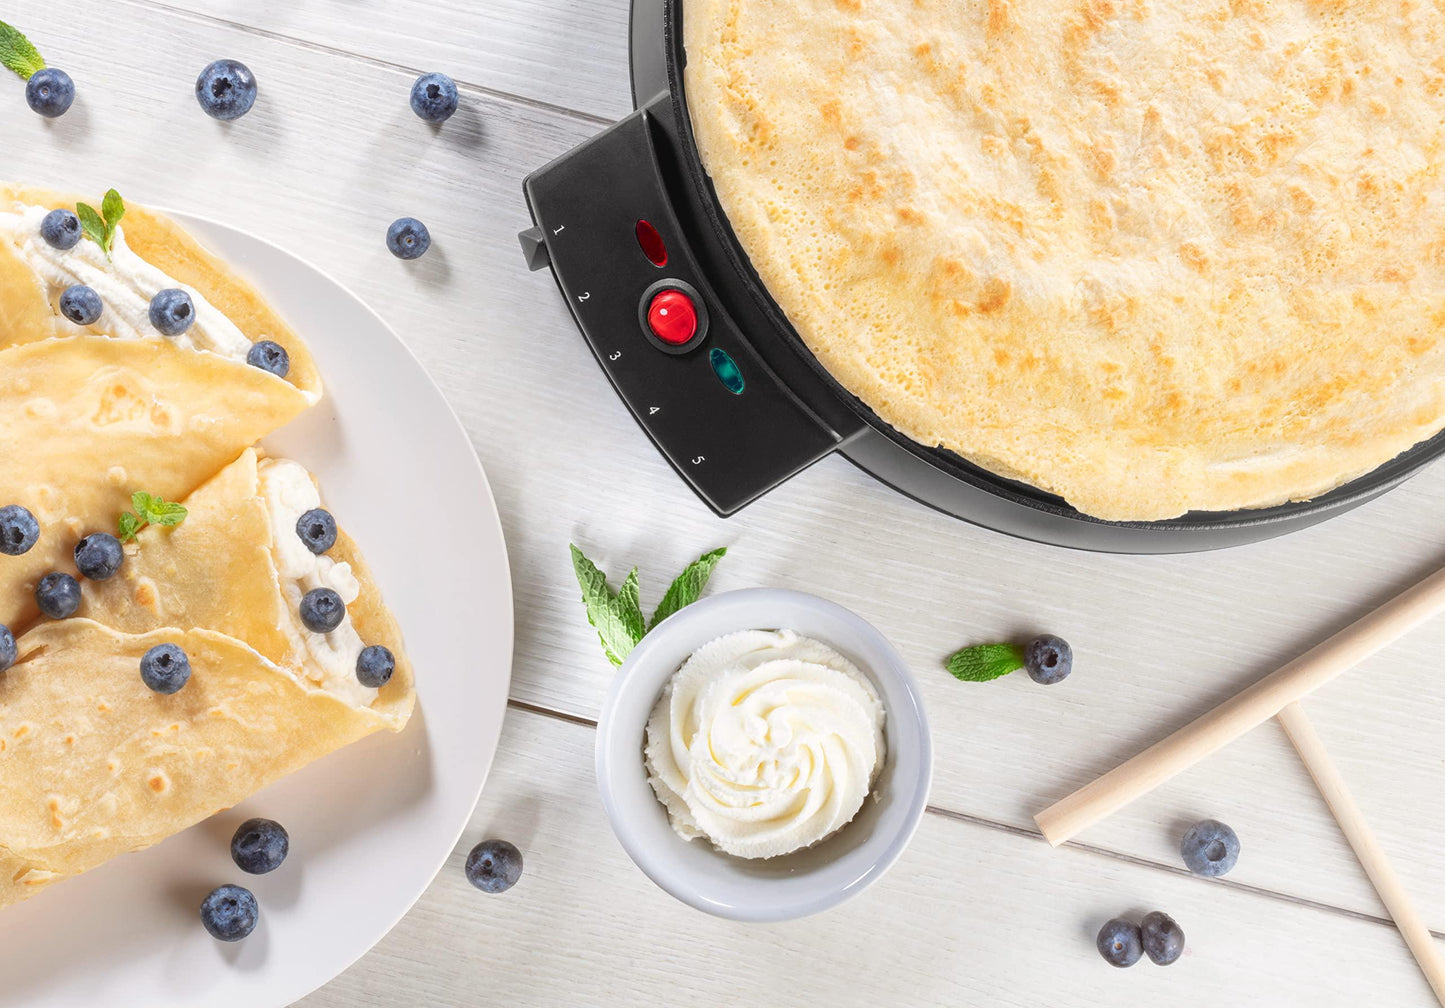 12" Griddle & Crepe Maker, Non-Stick Electric Crepe Pan w Batter Spreader & Recipe Guide- Dual Use for Blintzes Eggs Pancakes, Portable, Adjustable Temperature Settings - Holiday Breakfast or Dessert - CookCave